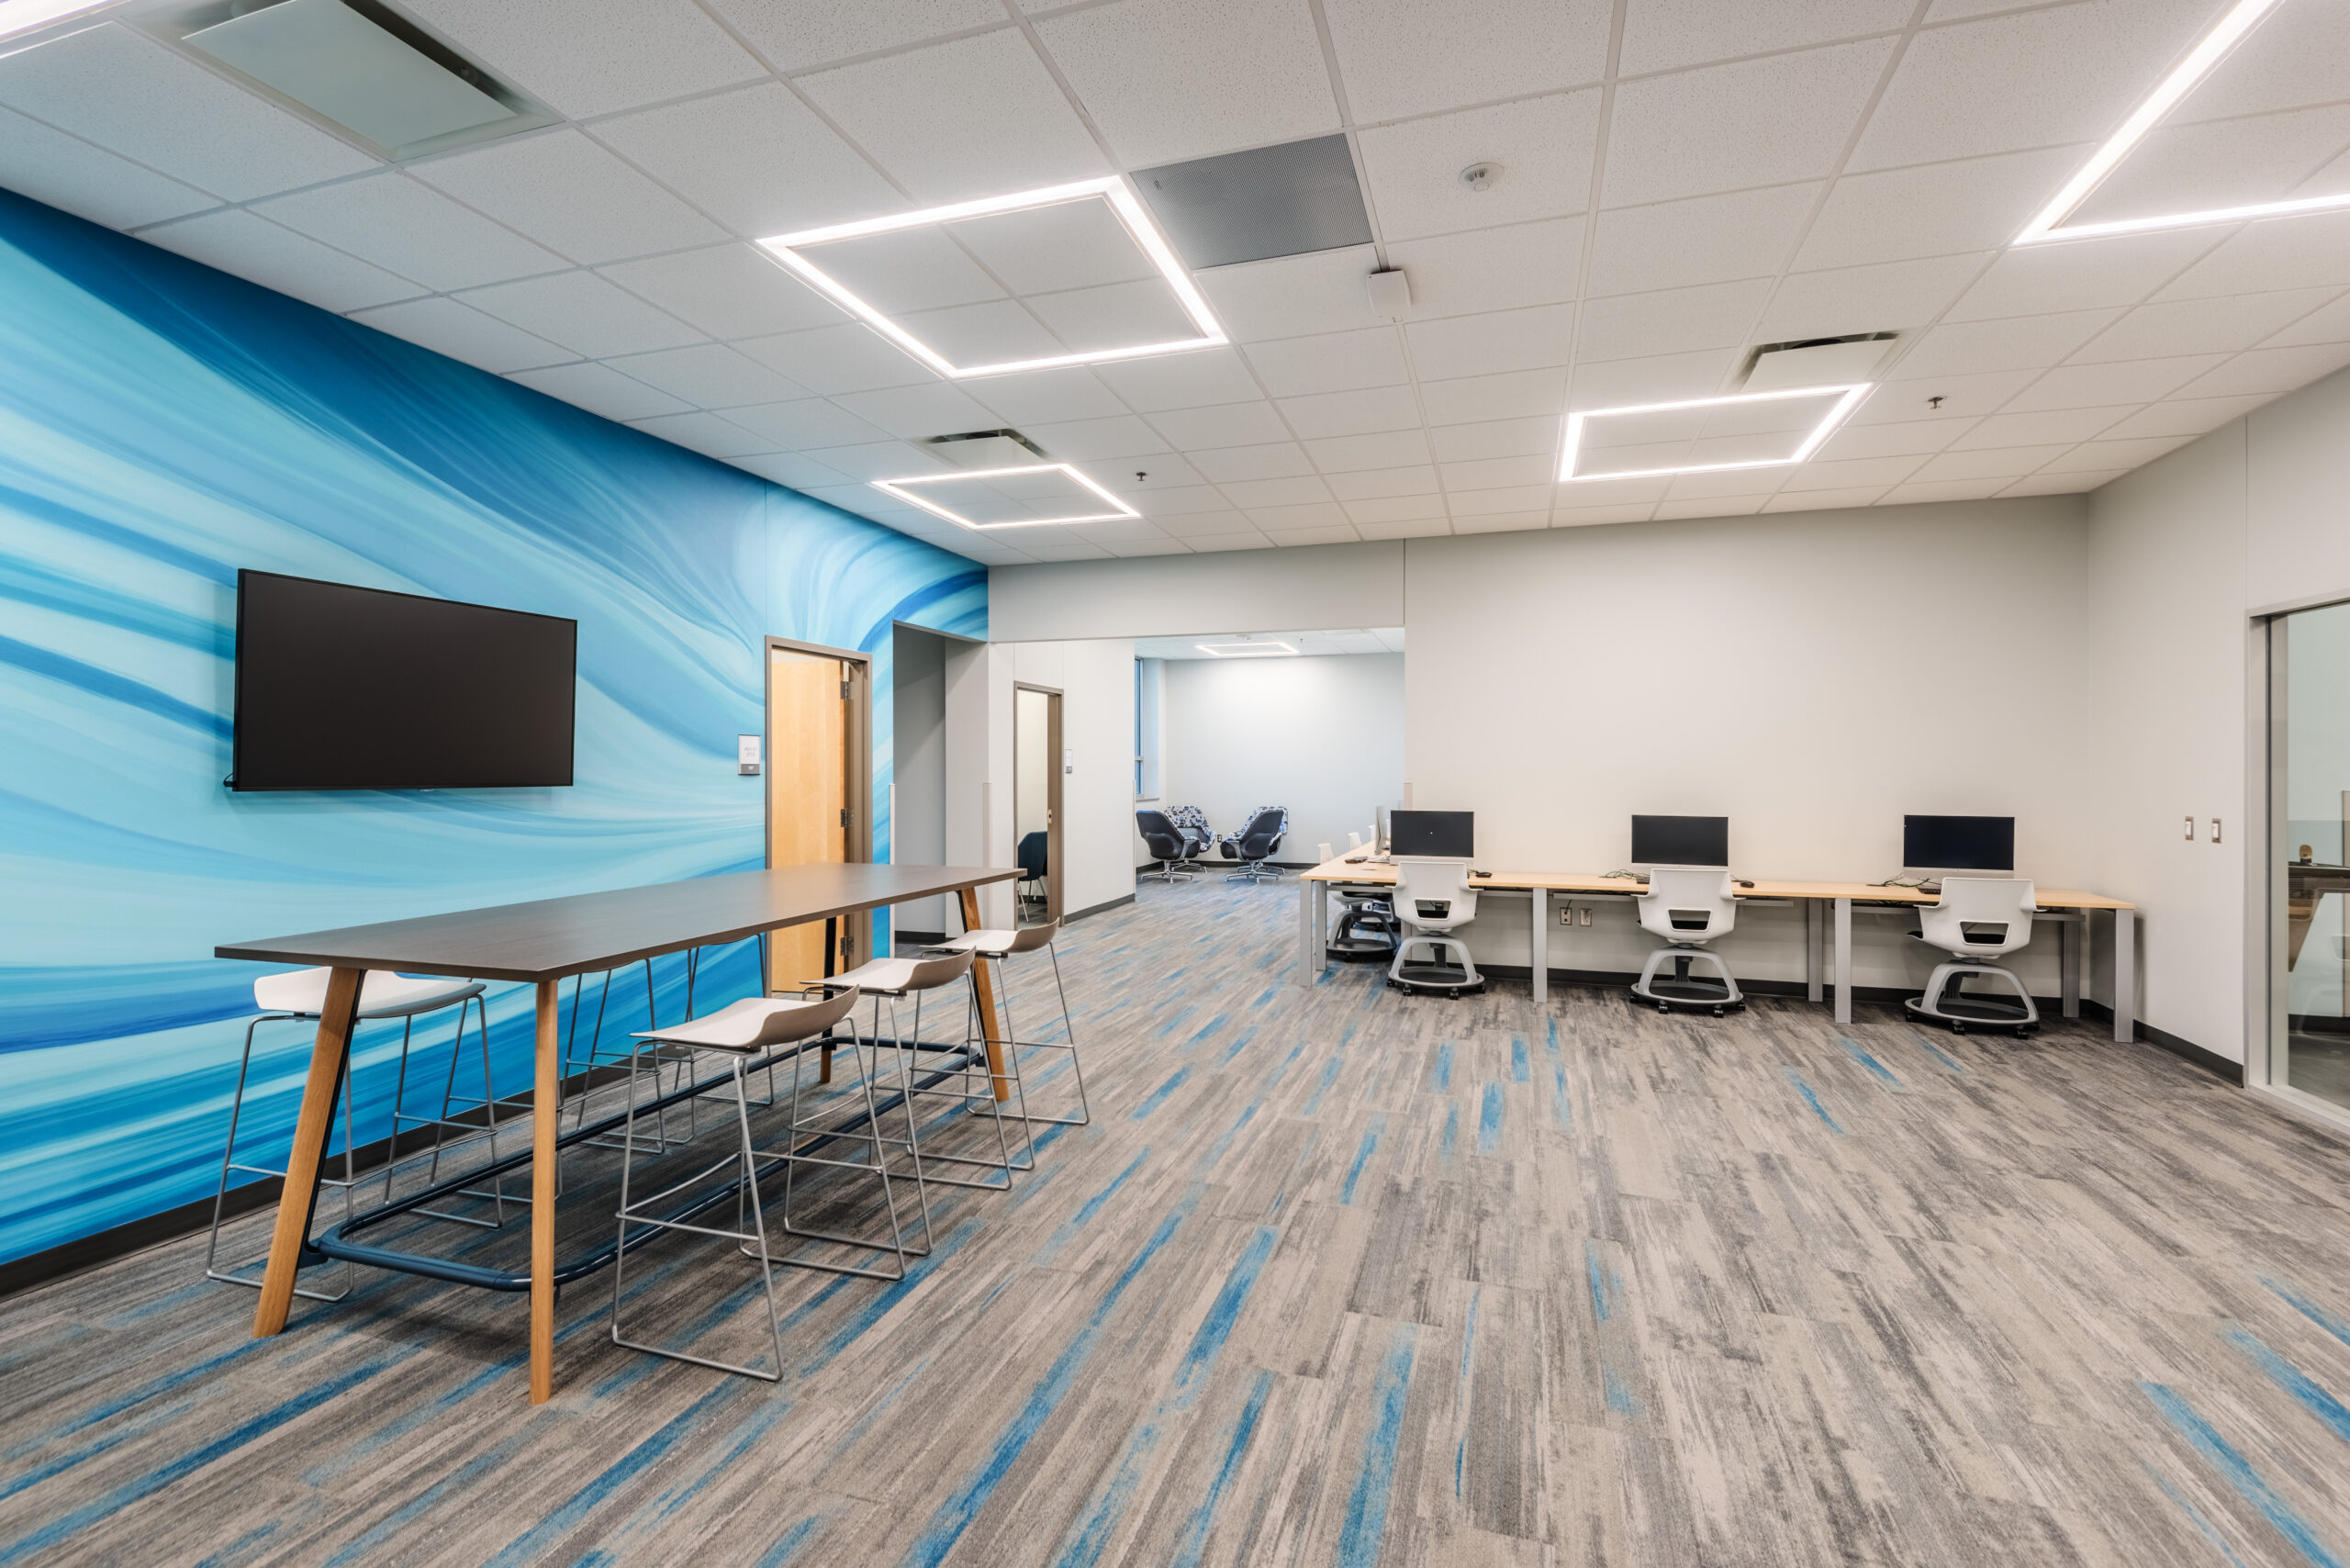 College of the Albemarle Dare County Campus Study Area with Computers, Desks, a Mounted TV, and a Blue Accent Wall